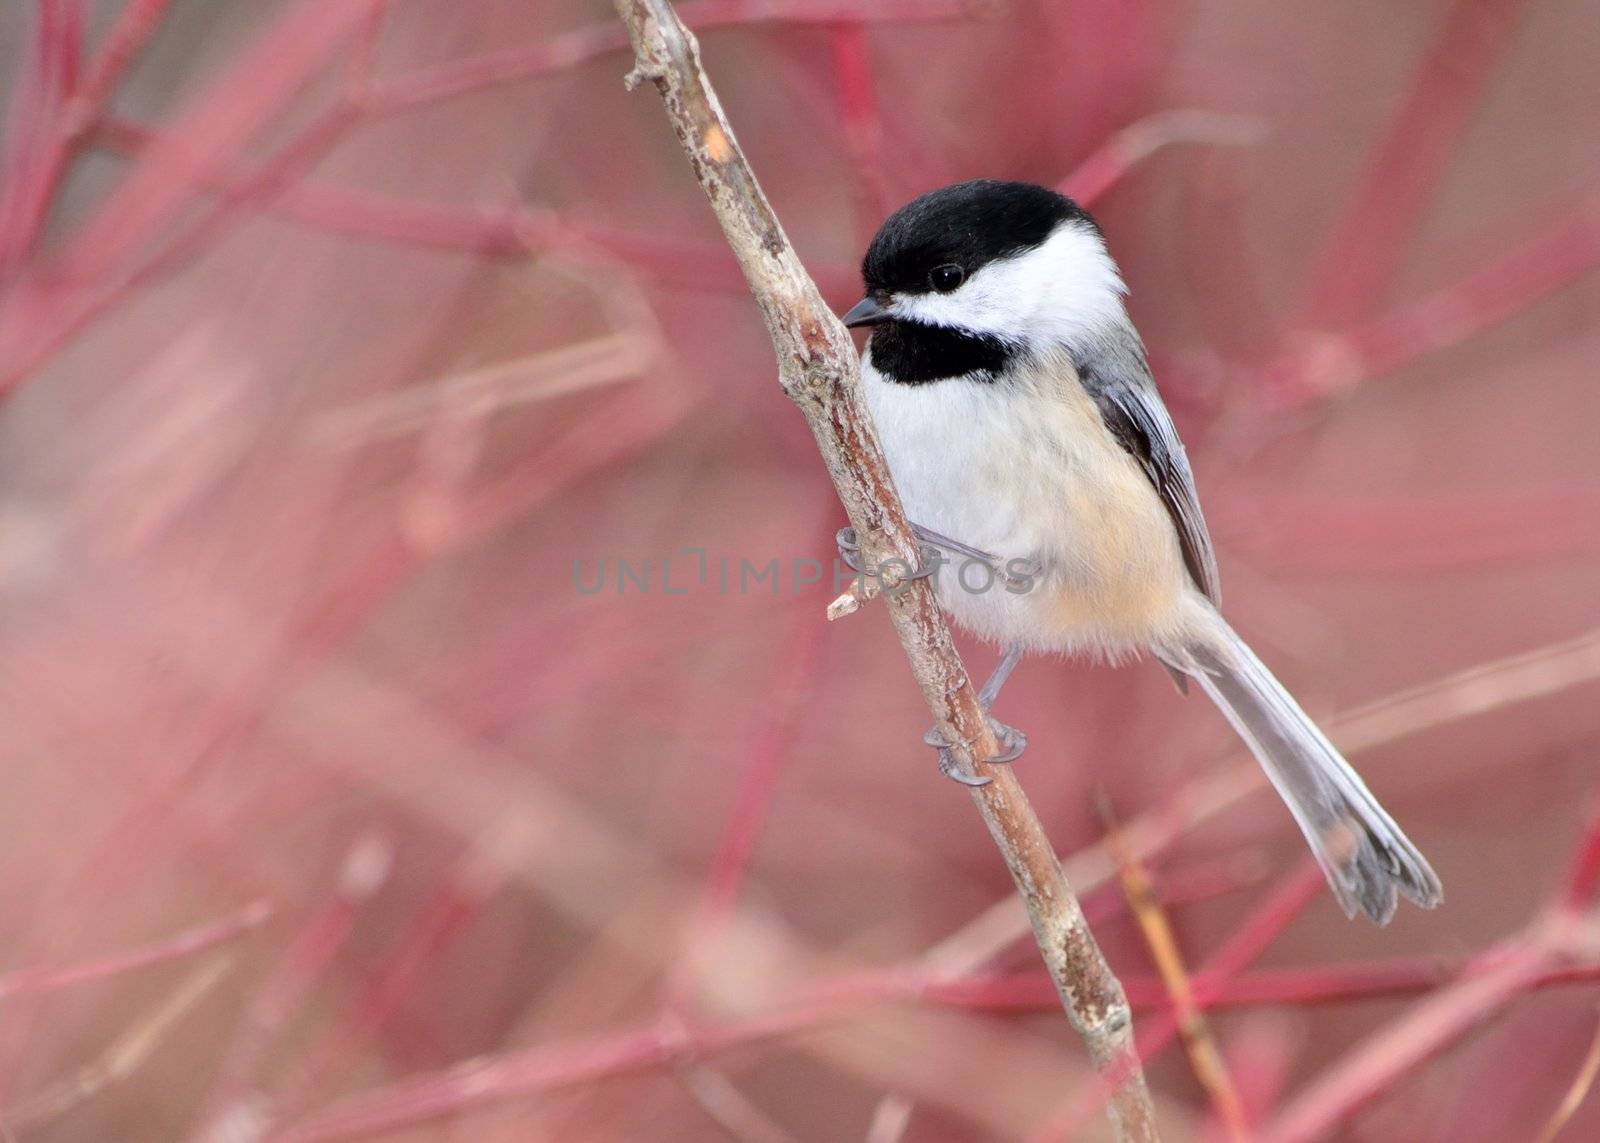 Black-capped Chickadee perched on a tree branch.